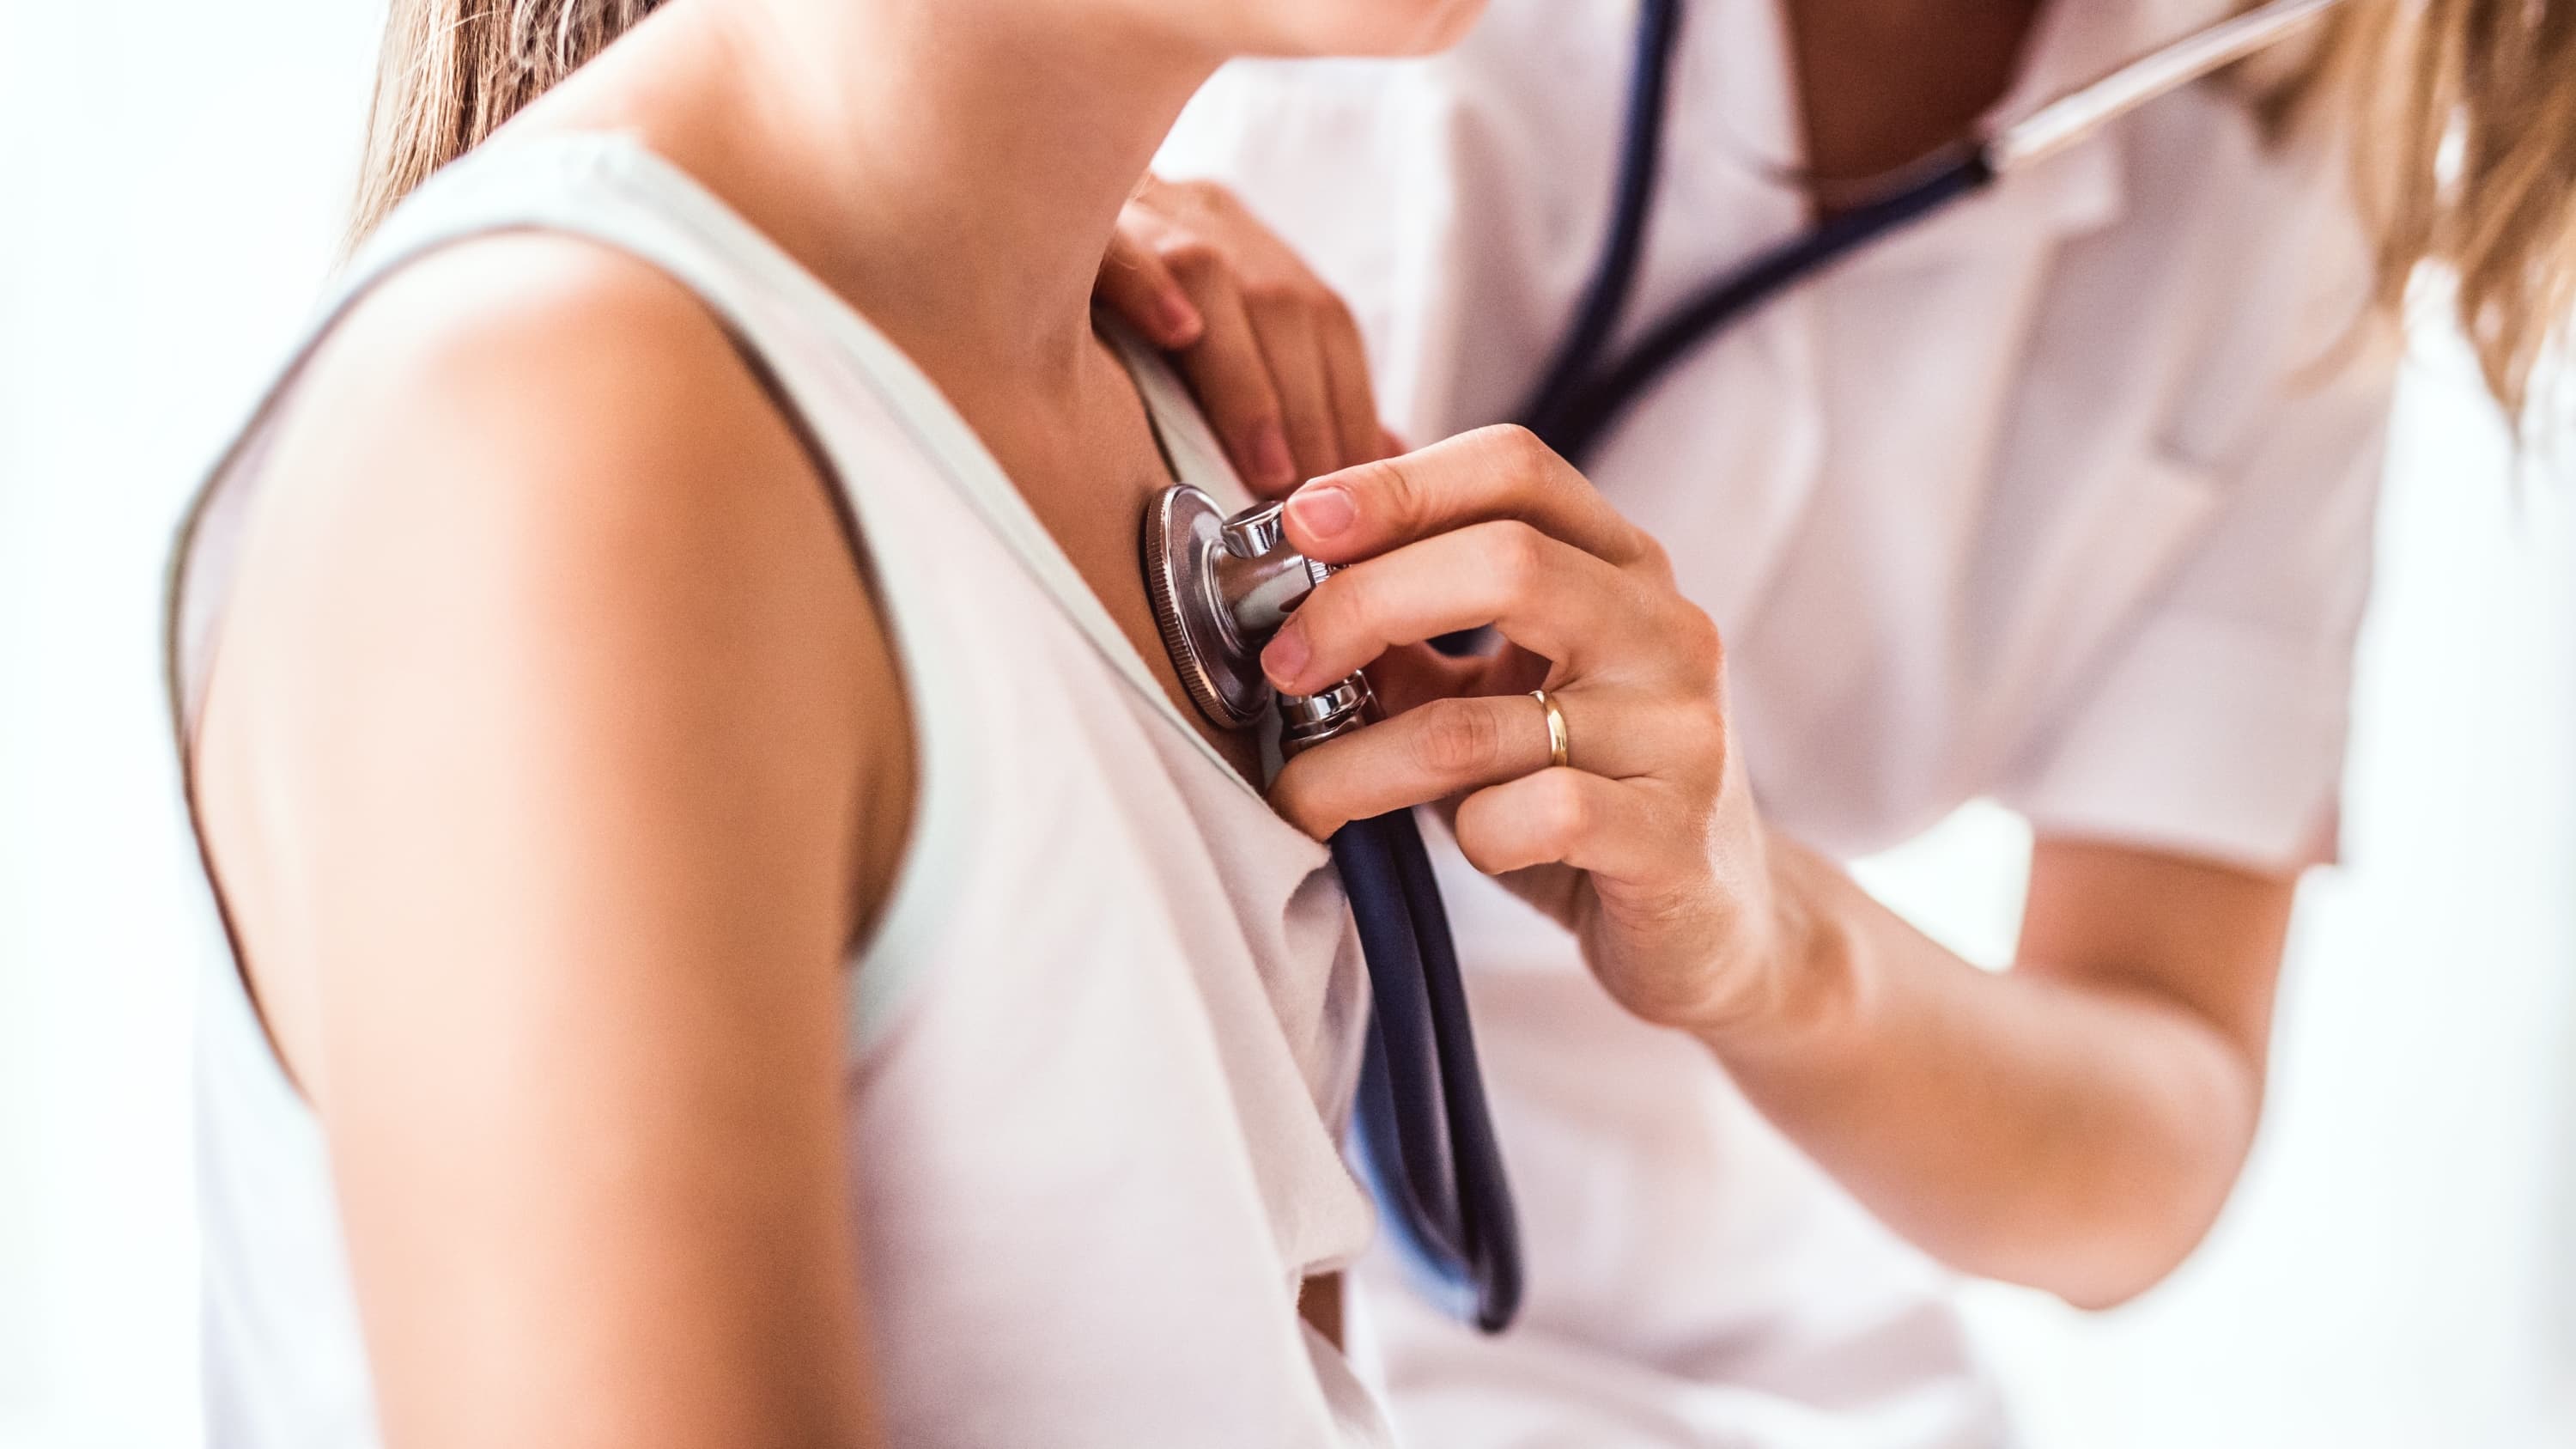 doctor placing stethescope on young girl's chest, looking for heart murmur